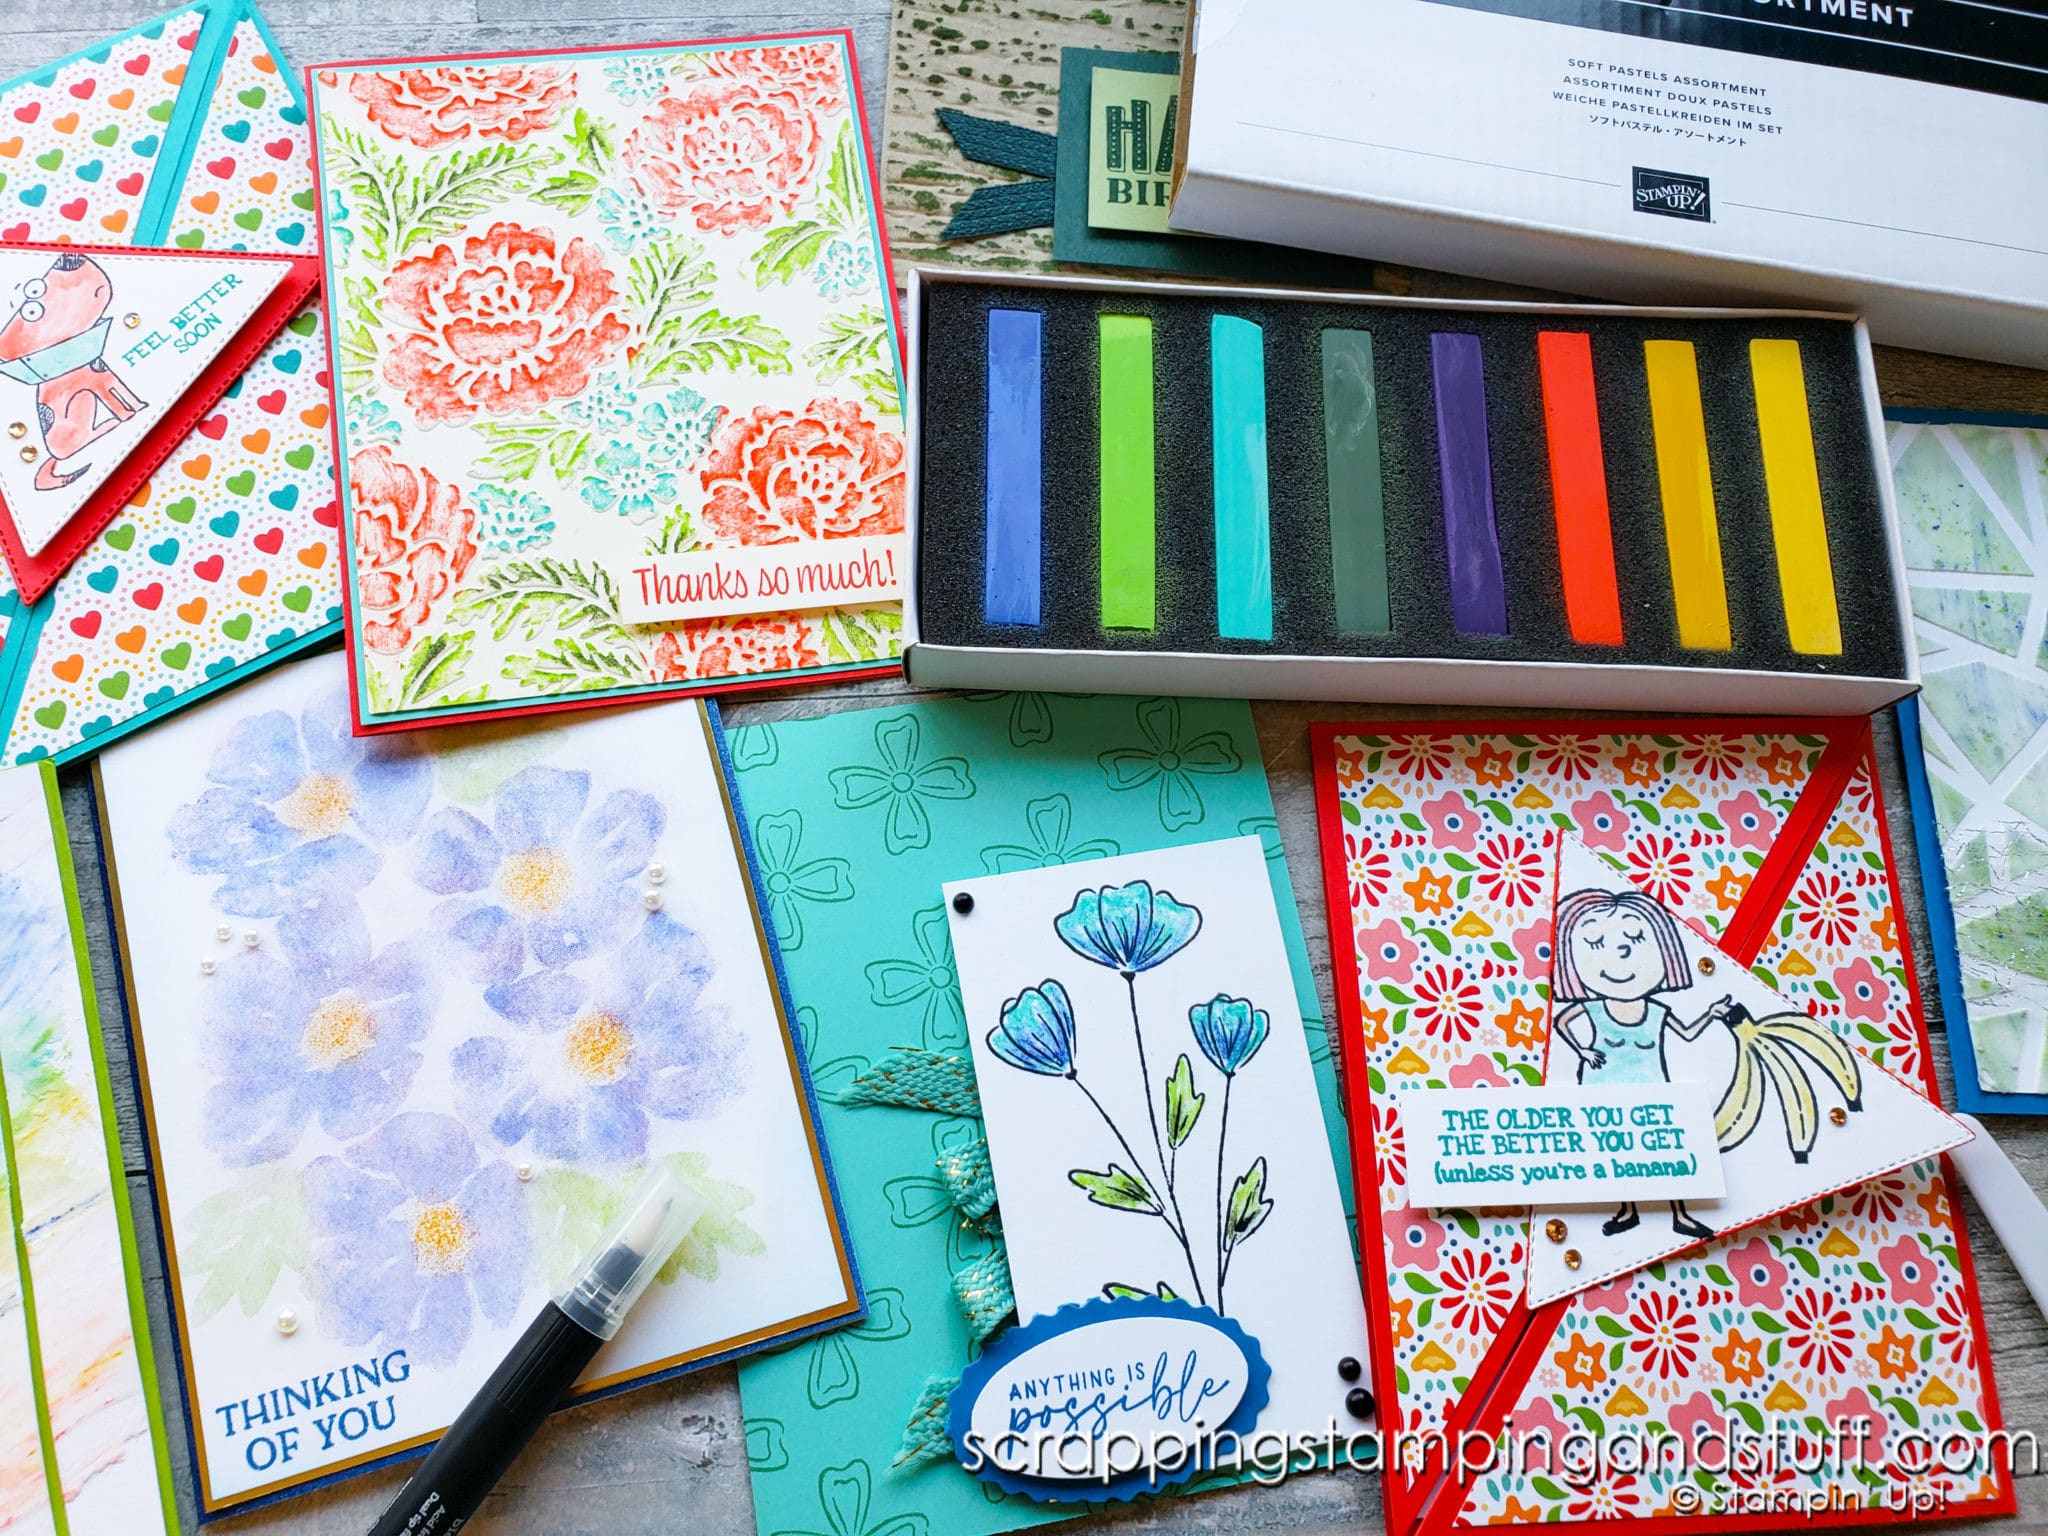 Best Soft Pastels – Using Stampin Up Dry Pastels To Add Color To Projects